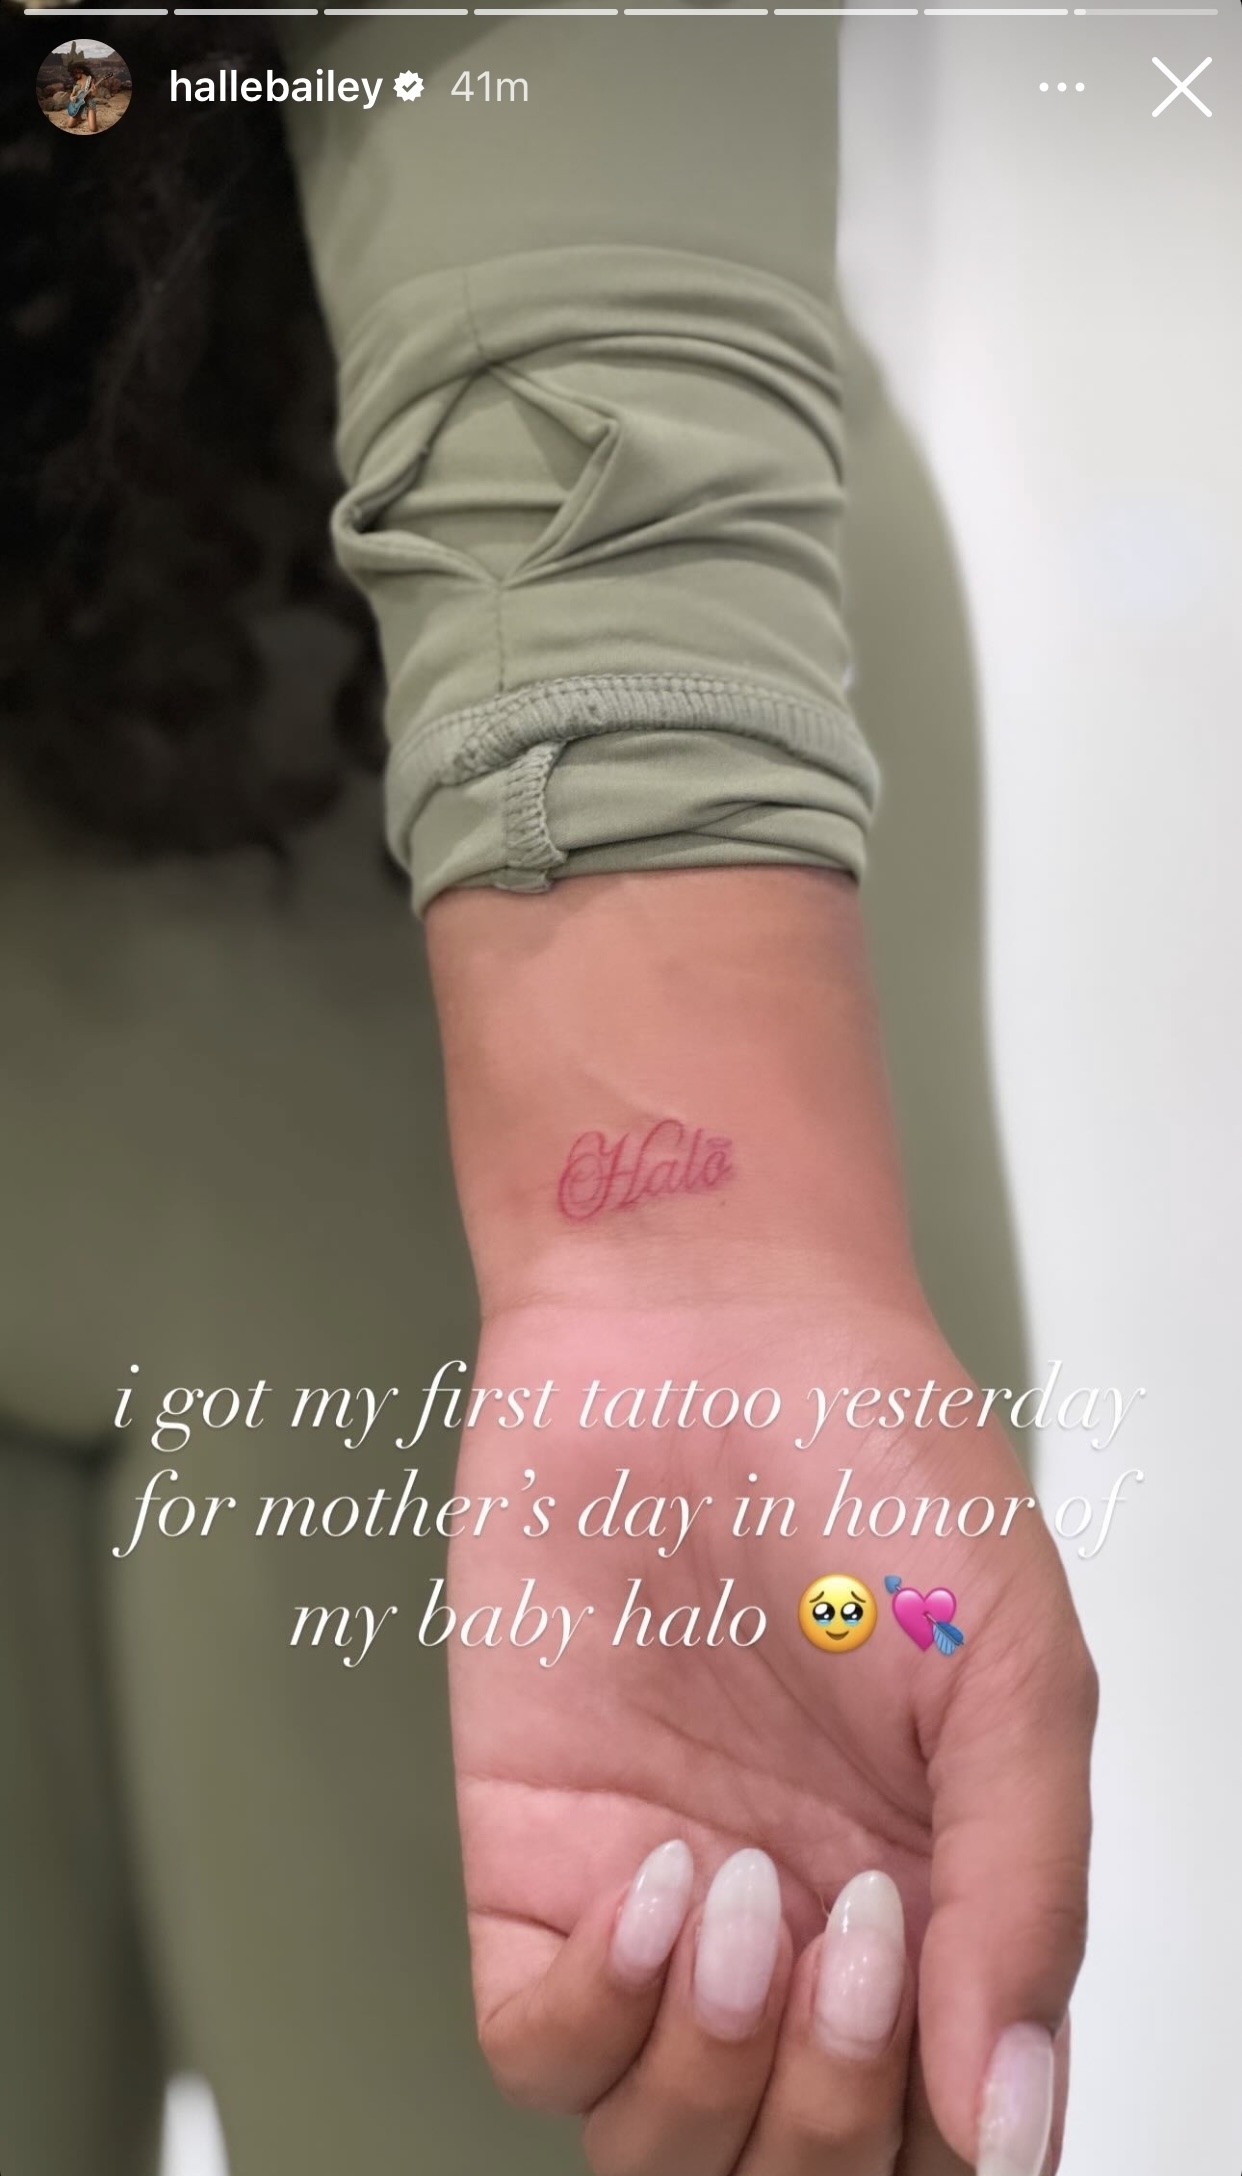 Person shows wrist with tattoo reading &quot;Halo,&quot; caption mentions first tattoo for Mother&#x27;s Day